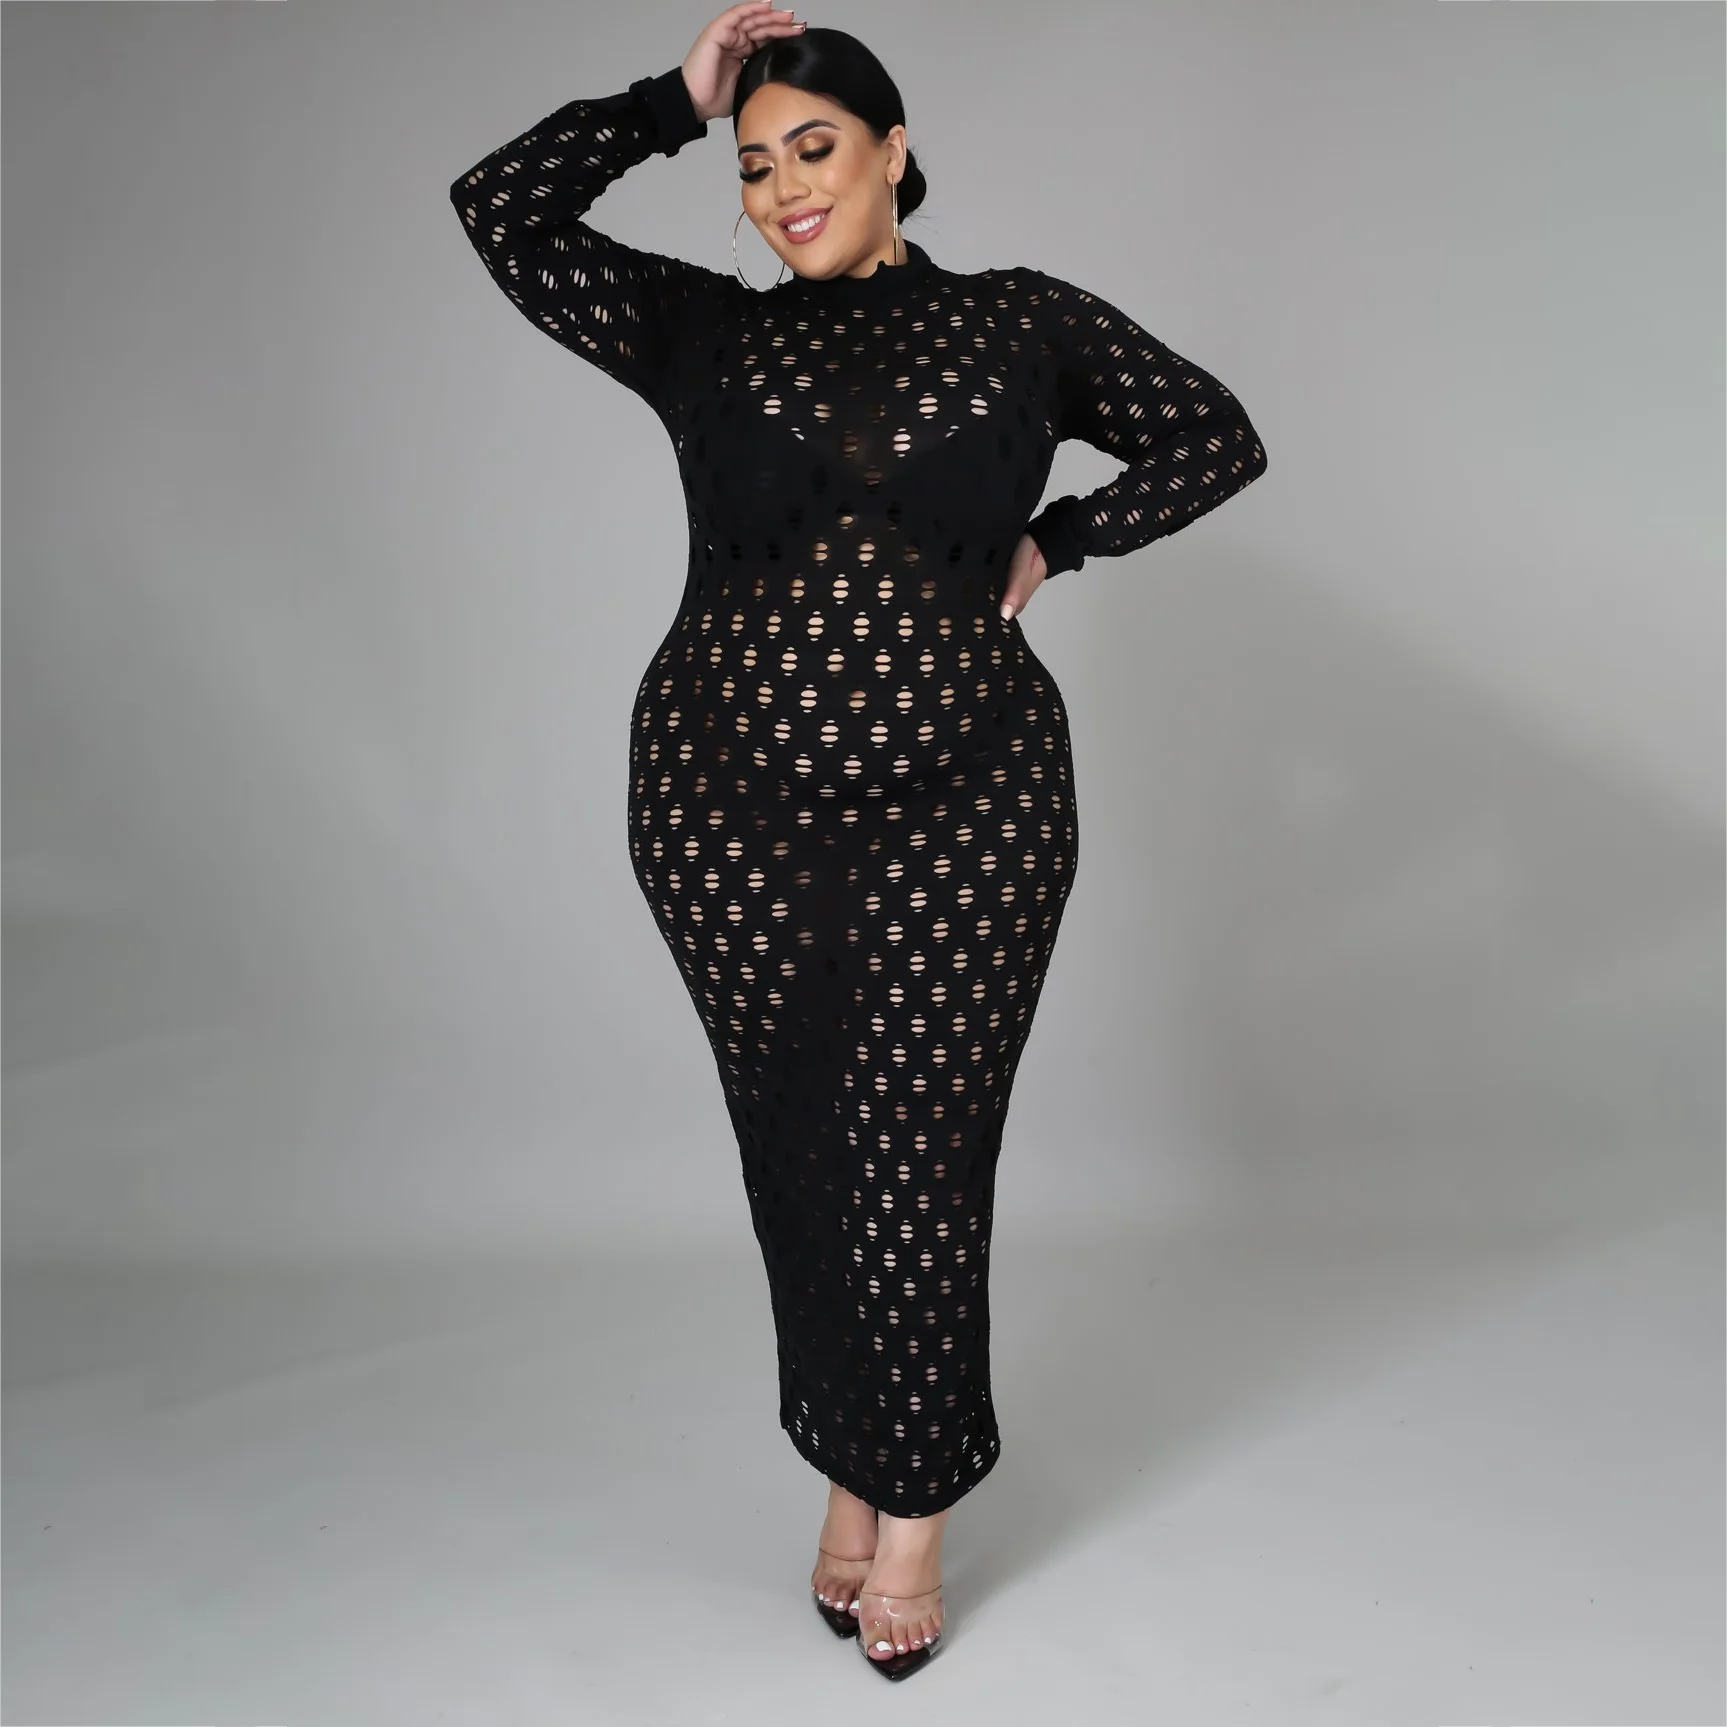 Women's Fashion Long Sleeve Solid Color Hollow Dress Mesh Stretch Long Skirt Plus Size Slim Sexy Dress Elegant Bottoming Skirt